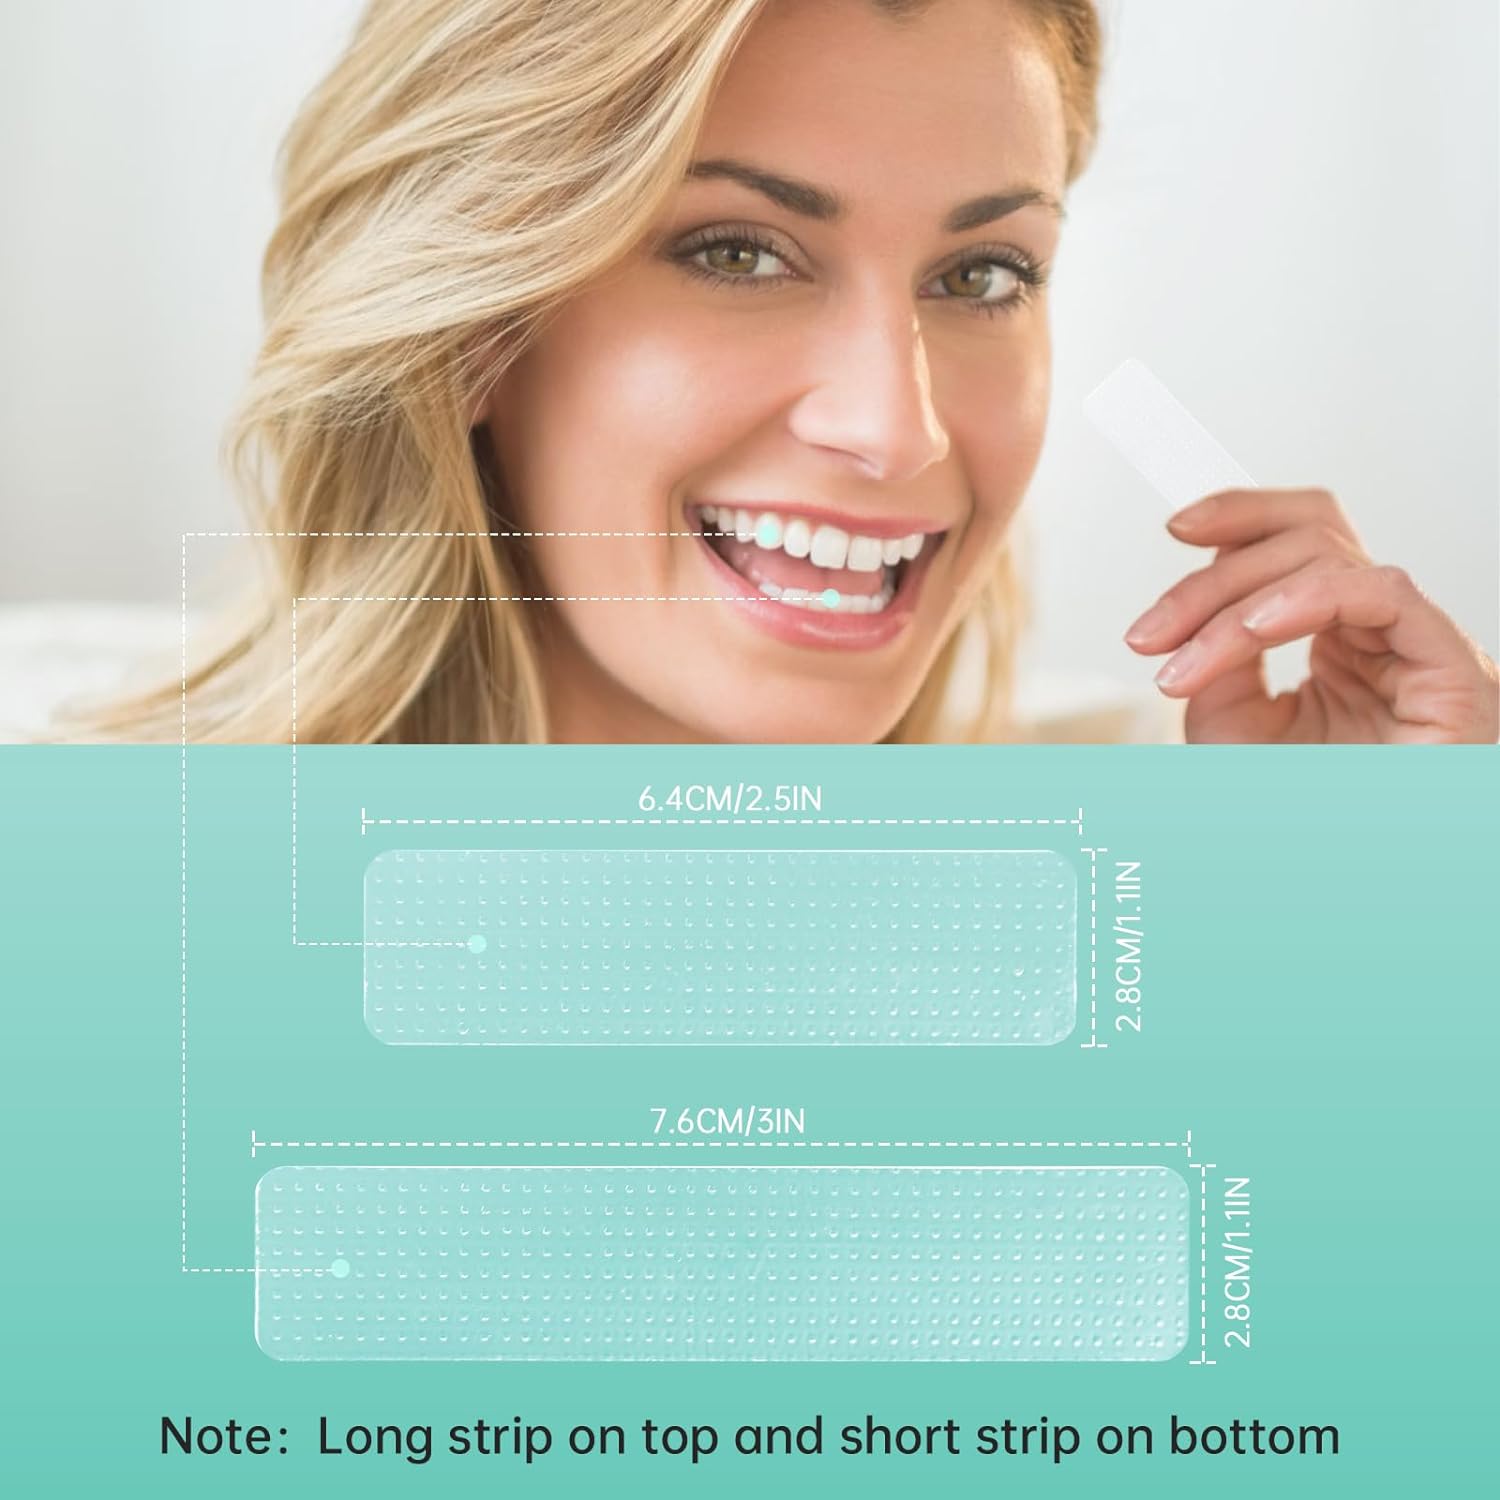 Teeth Whitening Strips- Hotodeal Teeth Whitener for Remove Coffee Tea Smoking Stains and Other Stains